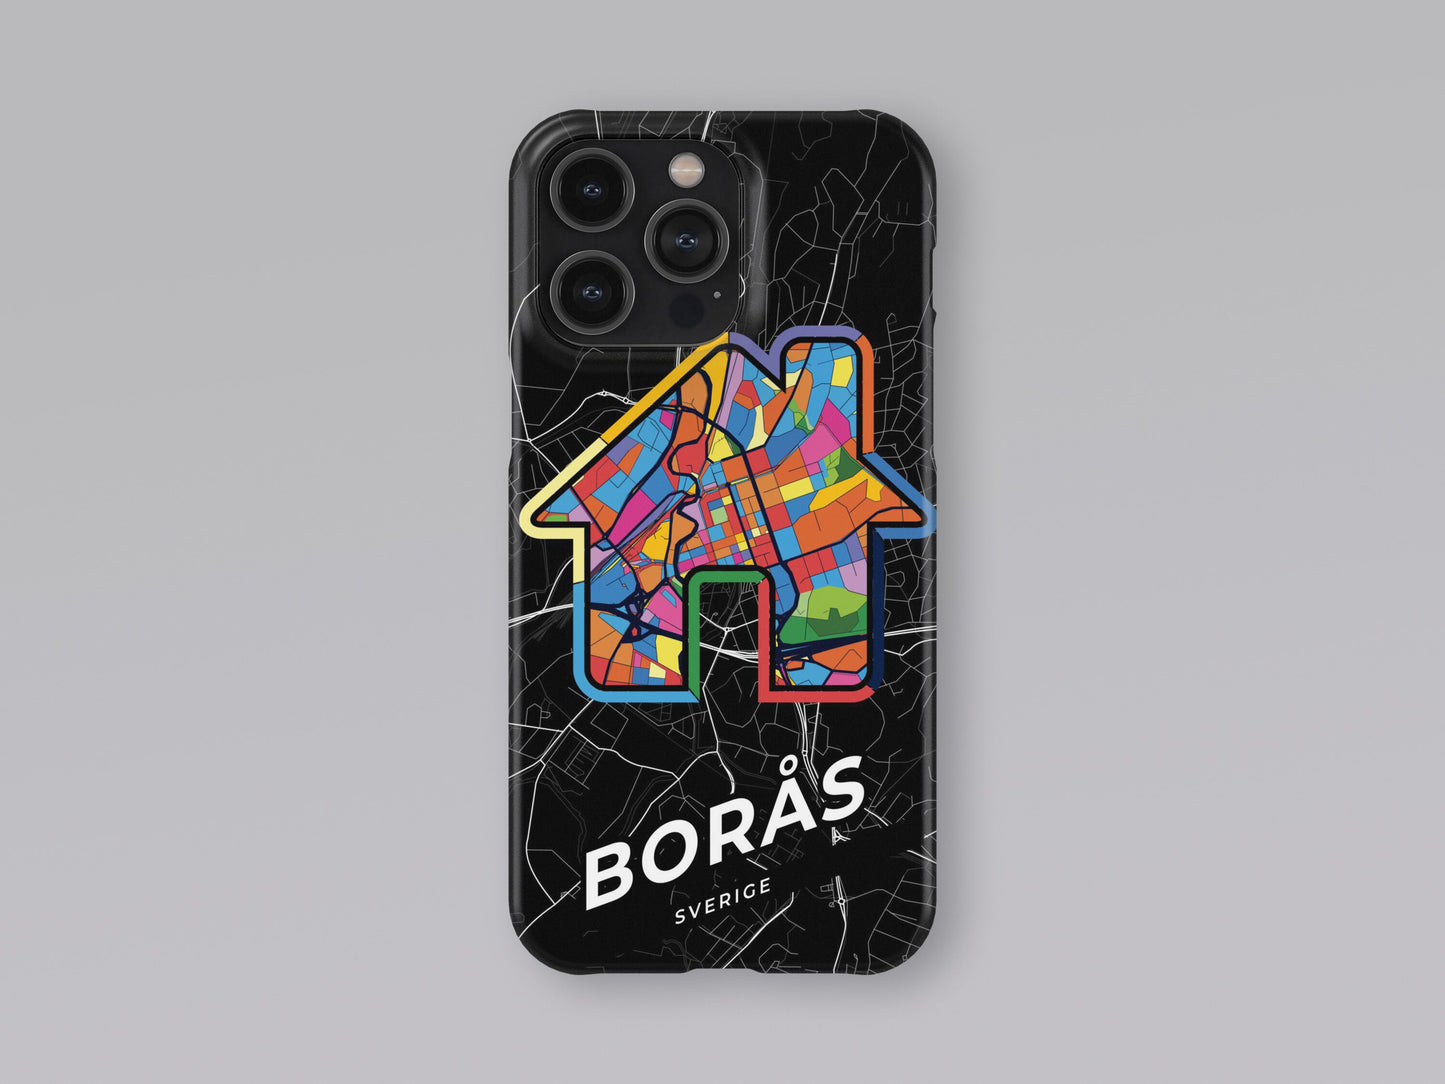 Borås Sweden slim phone case with colorful icon. Birthday, wedding or housewarming gift. Couple match cases. 3